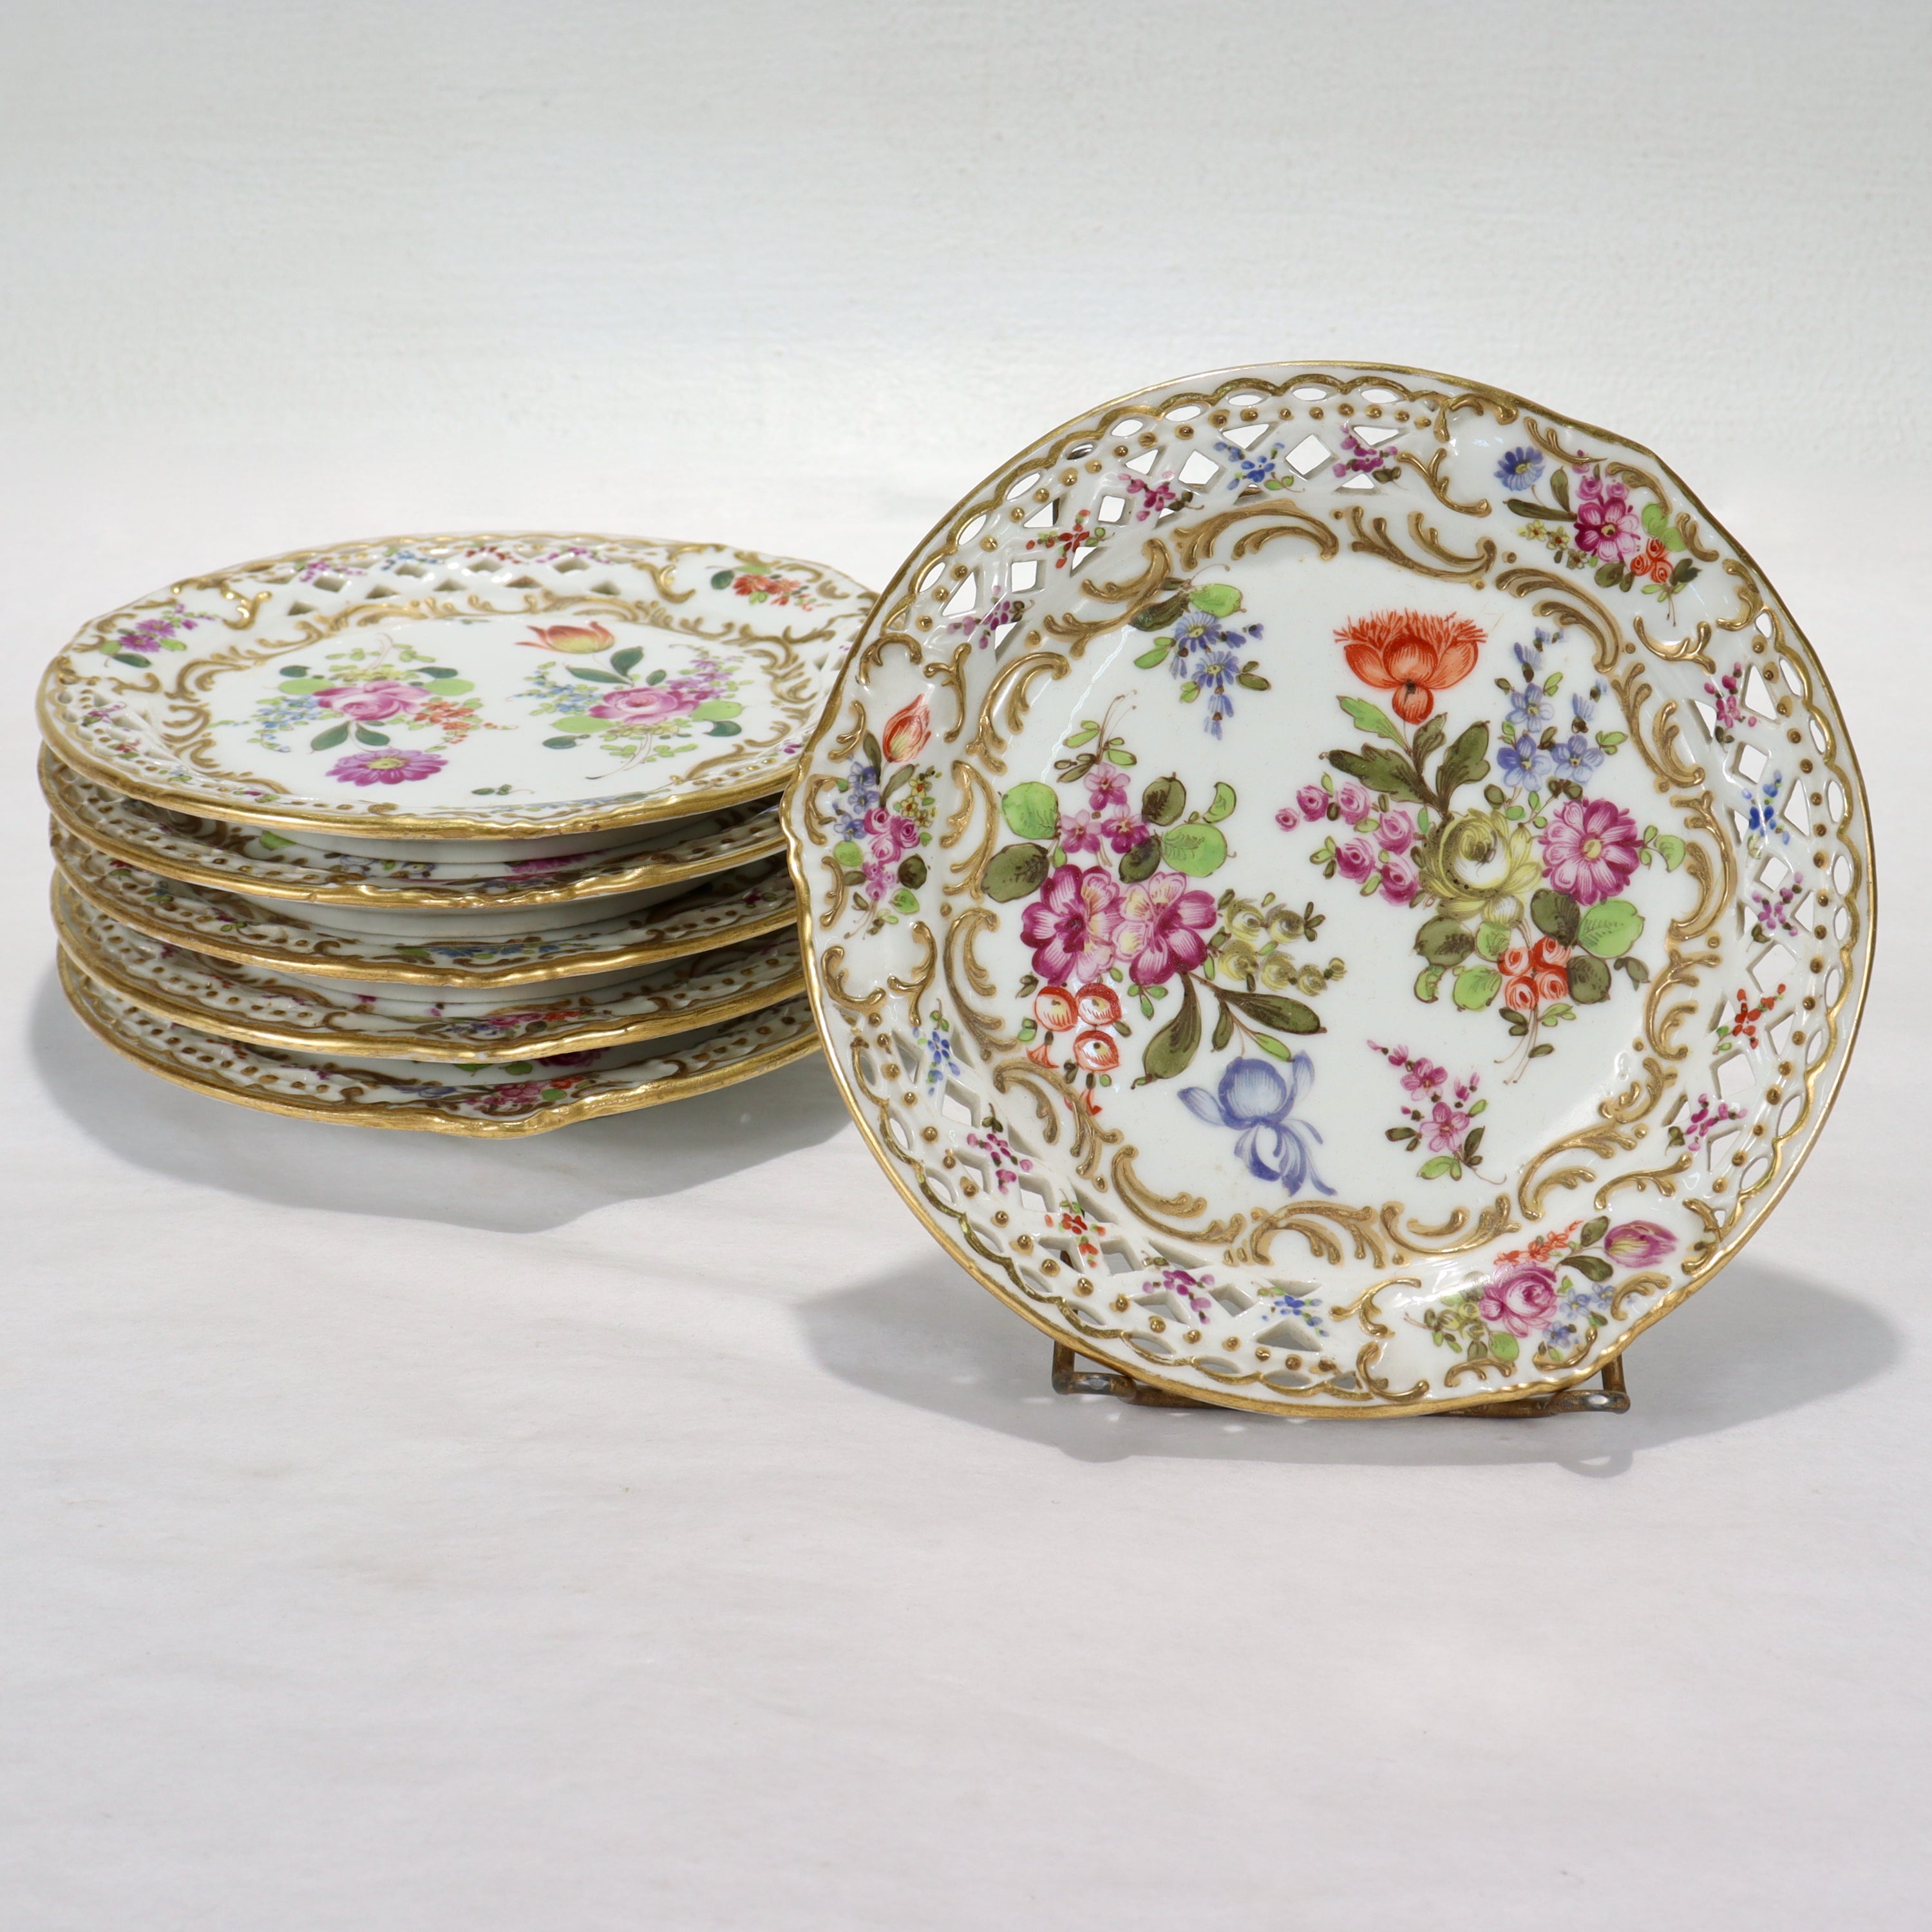 A set of 6 fine French reticulated porcelain plates.

By Bloch & Bourdois.

Decorated throughout with floral sprays, raised gold, gilt highlights, and a reticulated rim.

Simply a great set of French porcelain Dresden style